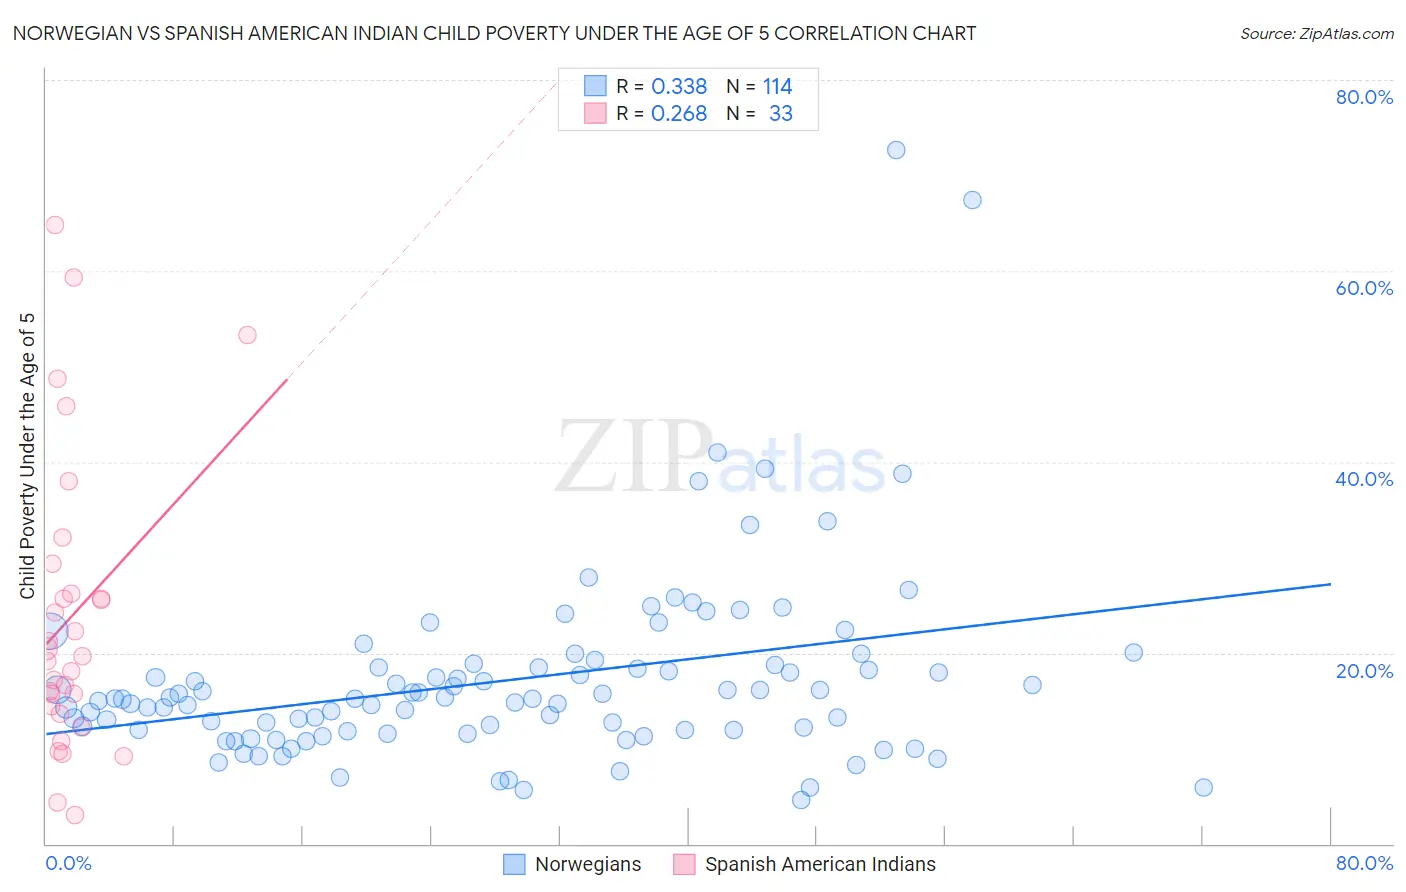 Norwegian vs Spanish American Indian Child Poverty Under the Age of 5